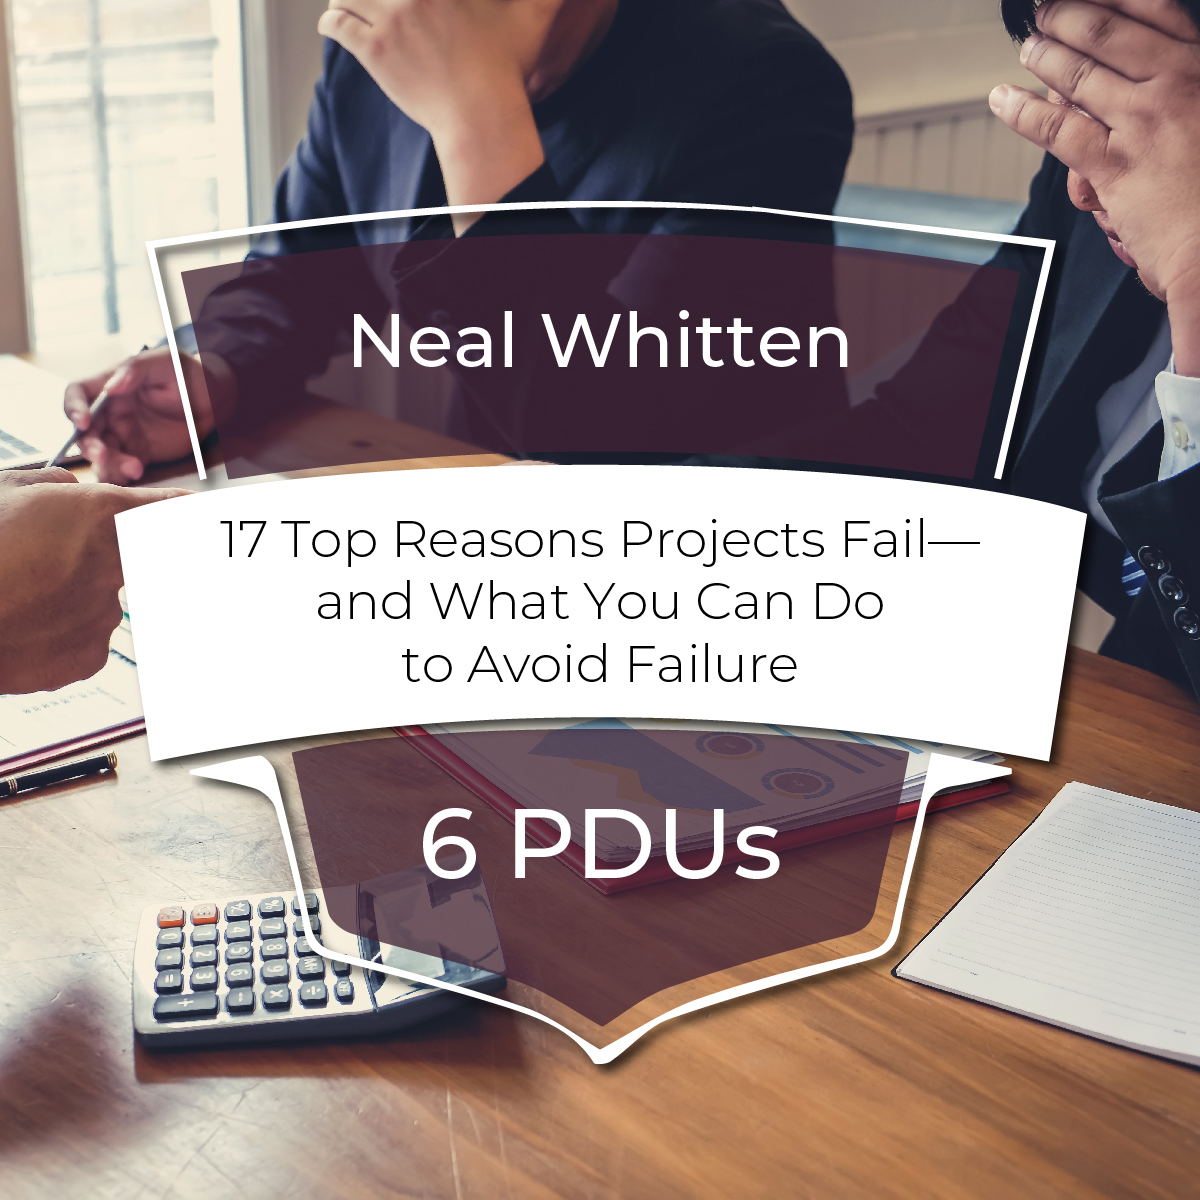 17 Top Reasons Why Projects Fail and What You Can Do to Avoid Failure